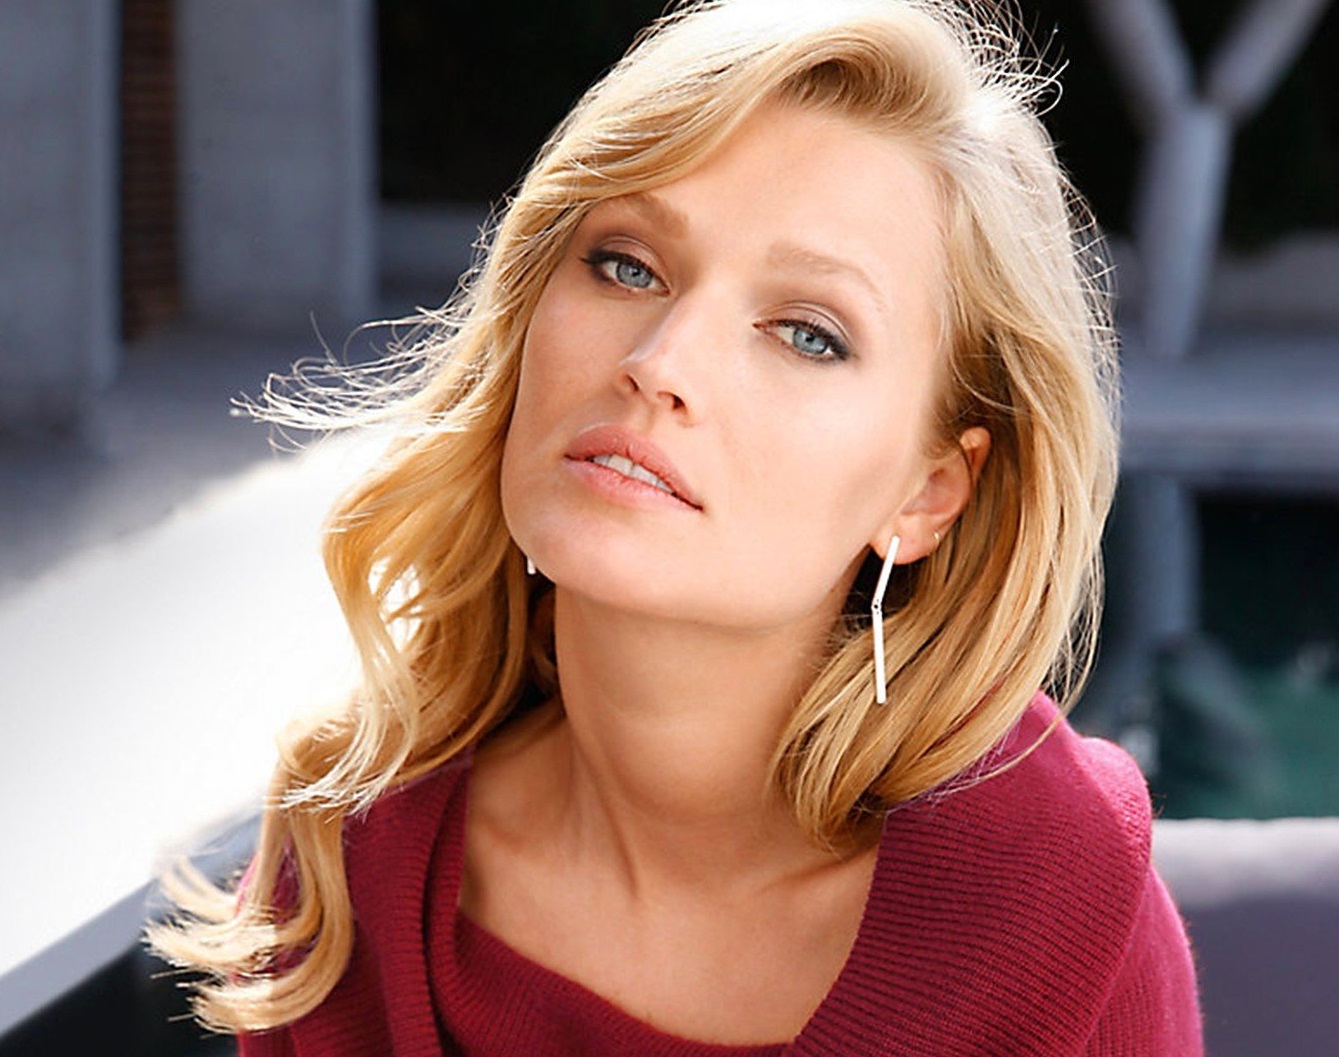 German fashion model Toni Garrn poses for Peter Hahn Fall Winter 2017 collection., Image: 339395243, License: Rights-managed, Restrictions: EDITORIAL USE ONLY, Model Release: no, Credit line: Profimedia, Balawa Pics